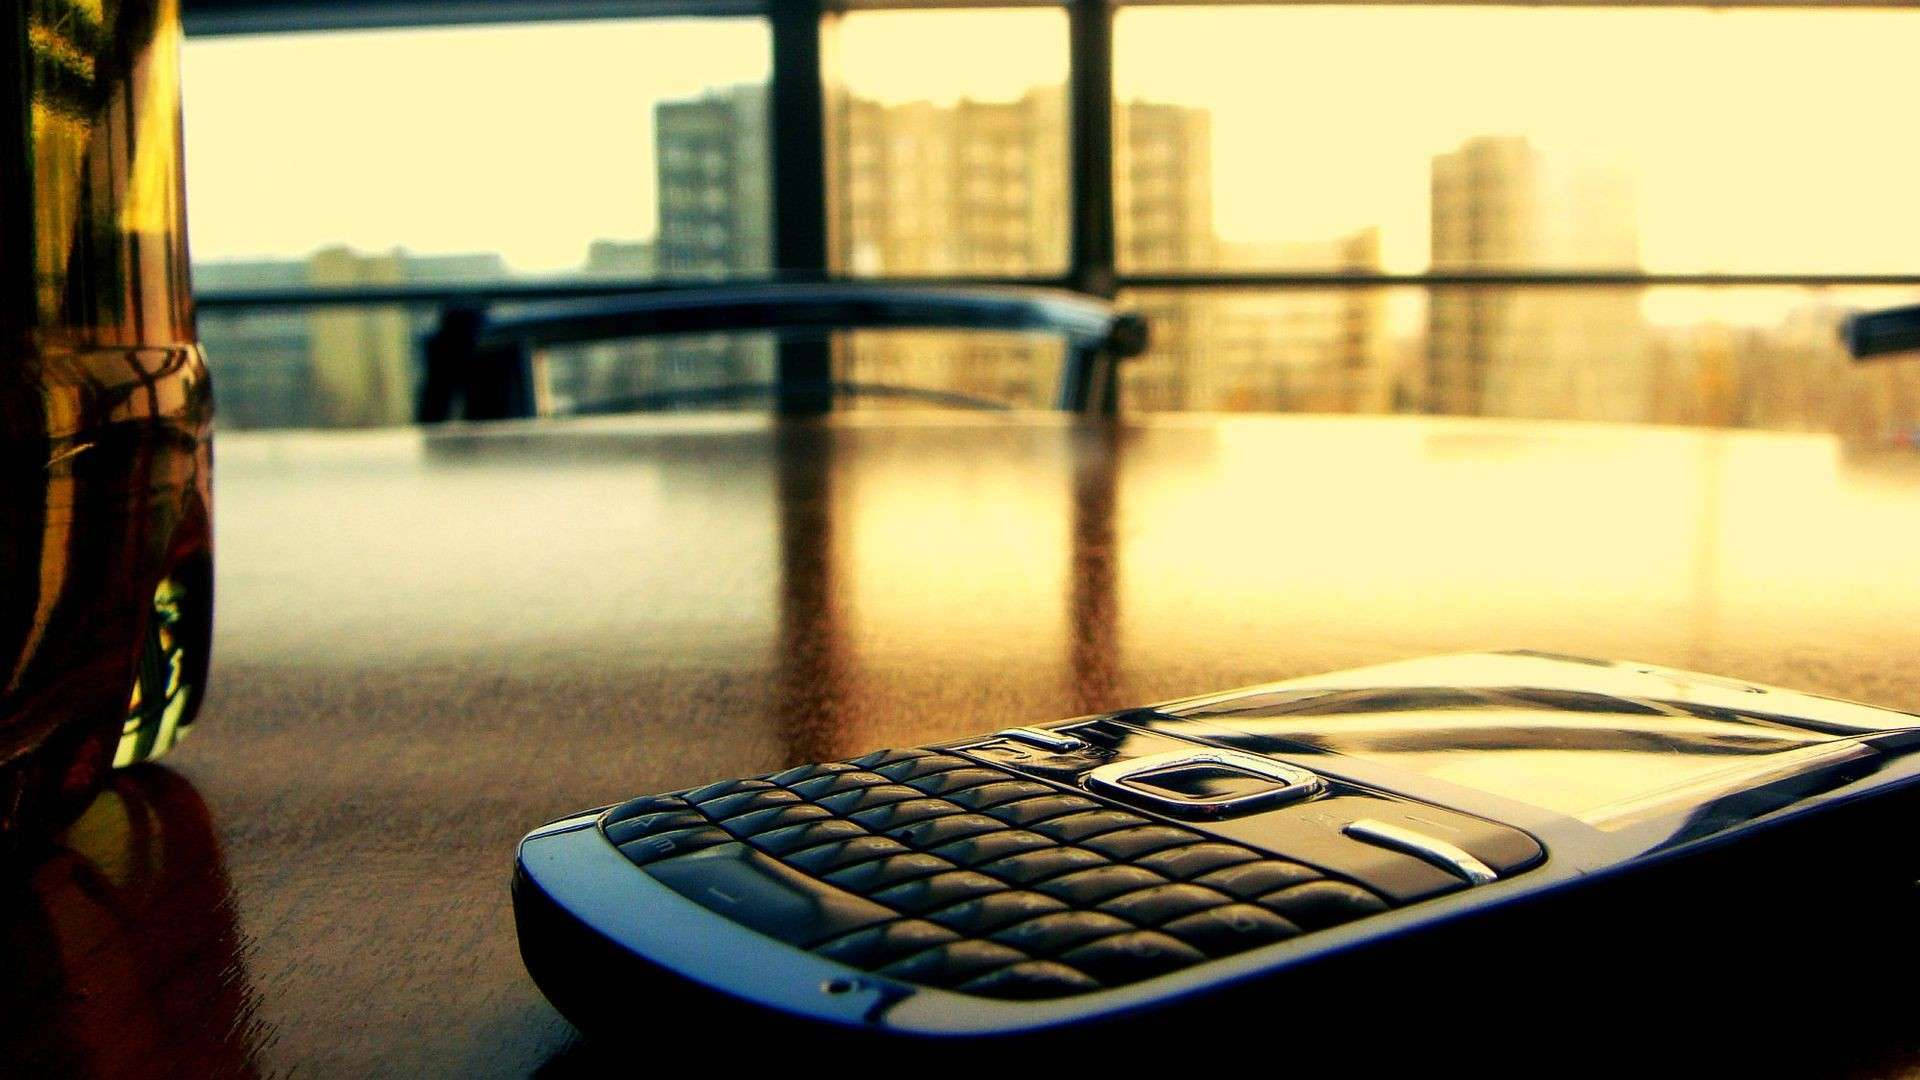 Blackberry Phone And Sunset